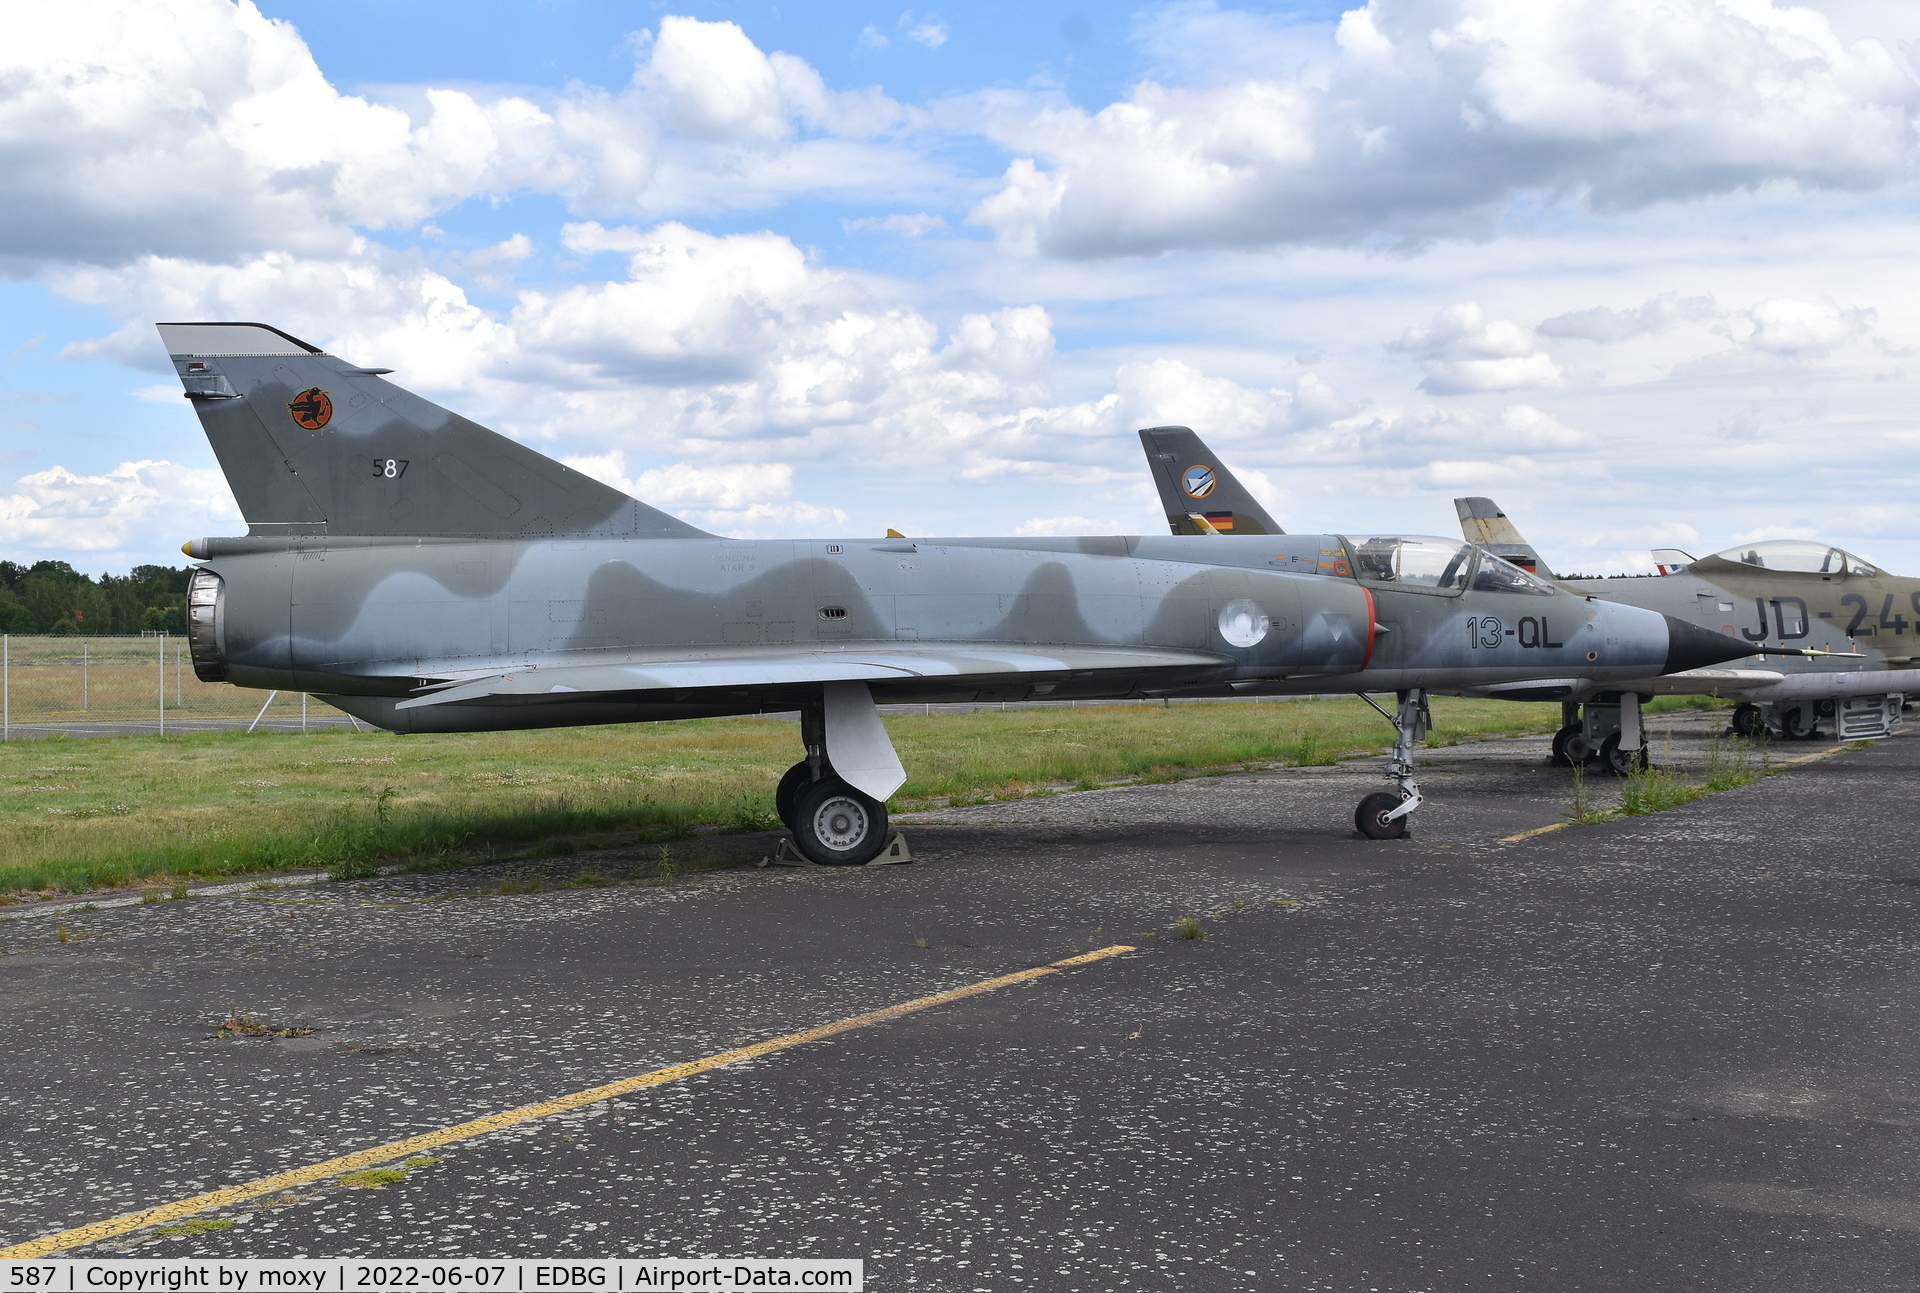 587, Dassault Mirage IIIE C/N 587, Dassault Mirage IIIE at the Bundeswehr Museum of Military History – Berlin-Gatow Airfield.